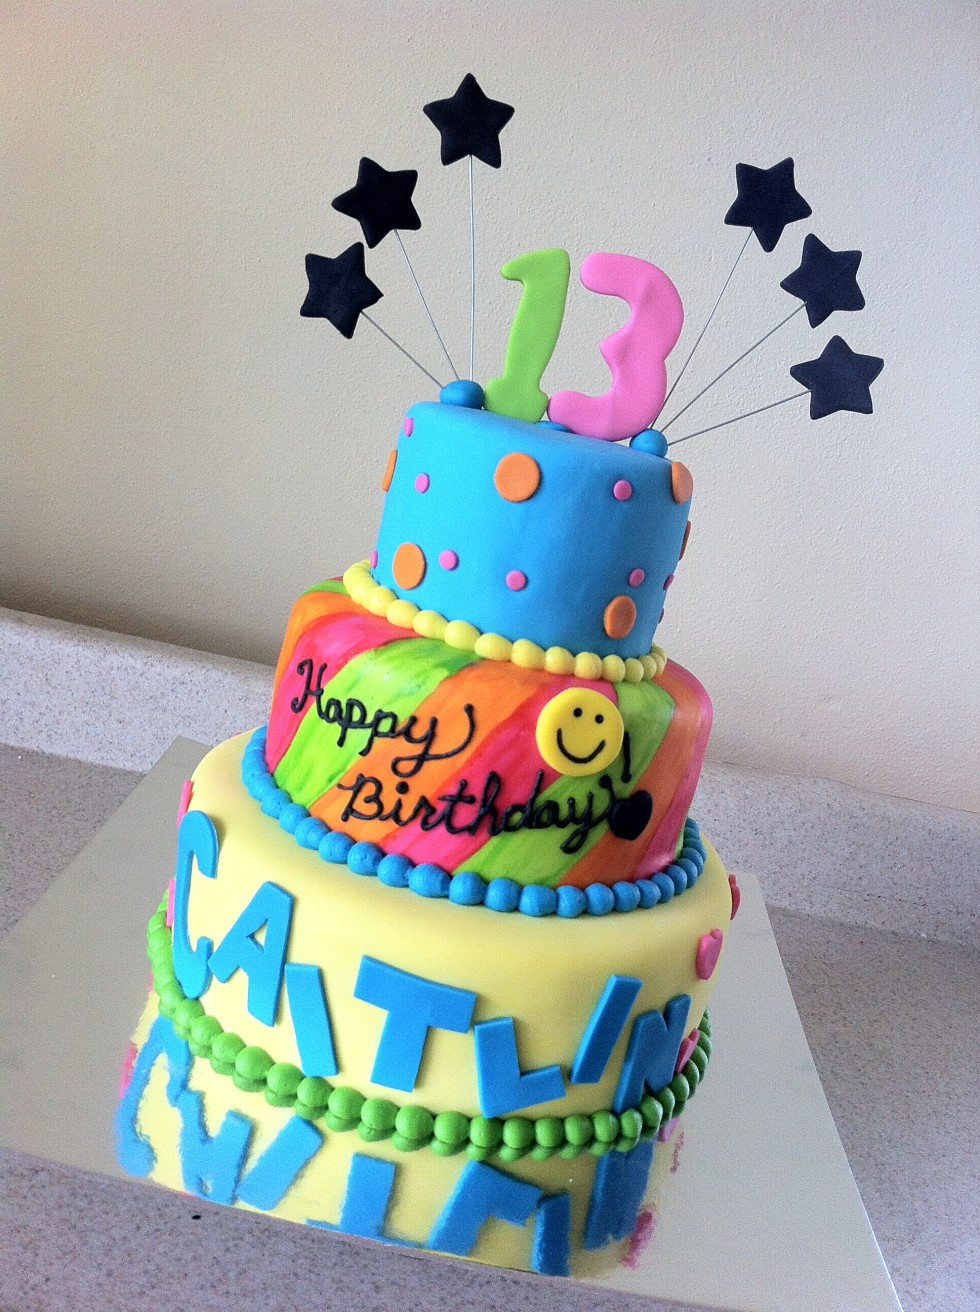 Walmart Bakery Birthday Cakes
 Home Tips Kids Will Have A Fun With Walmart Cake Designs